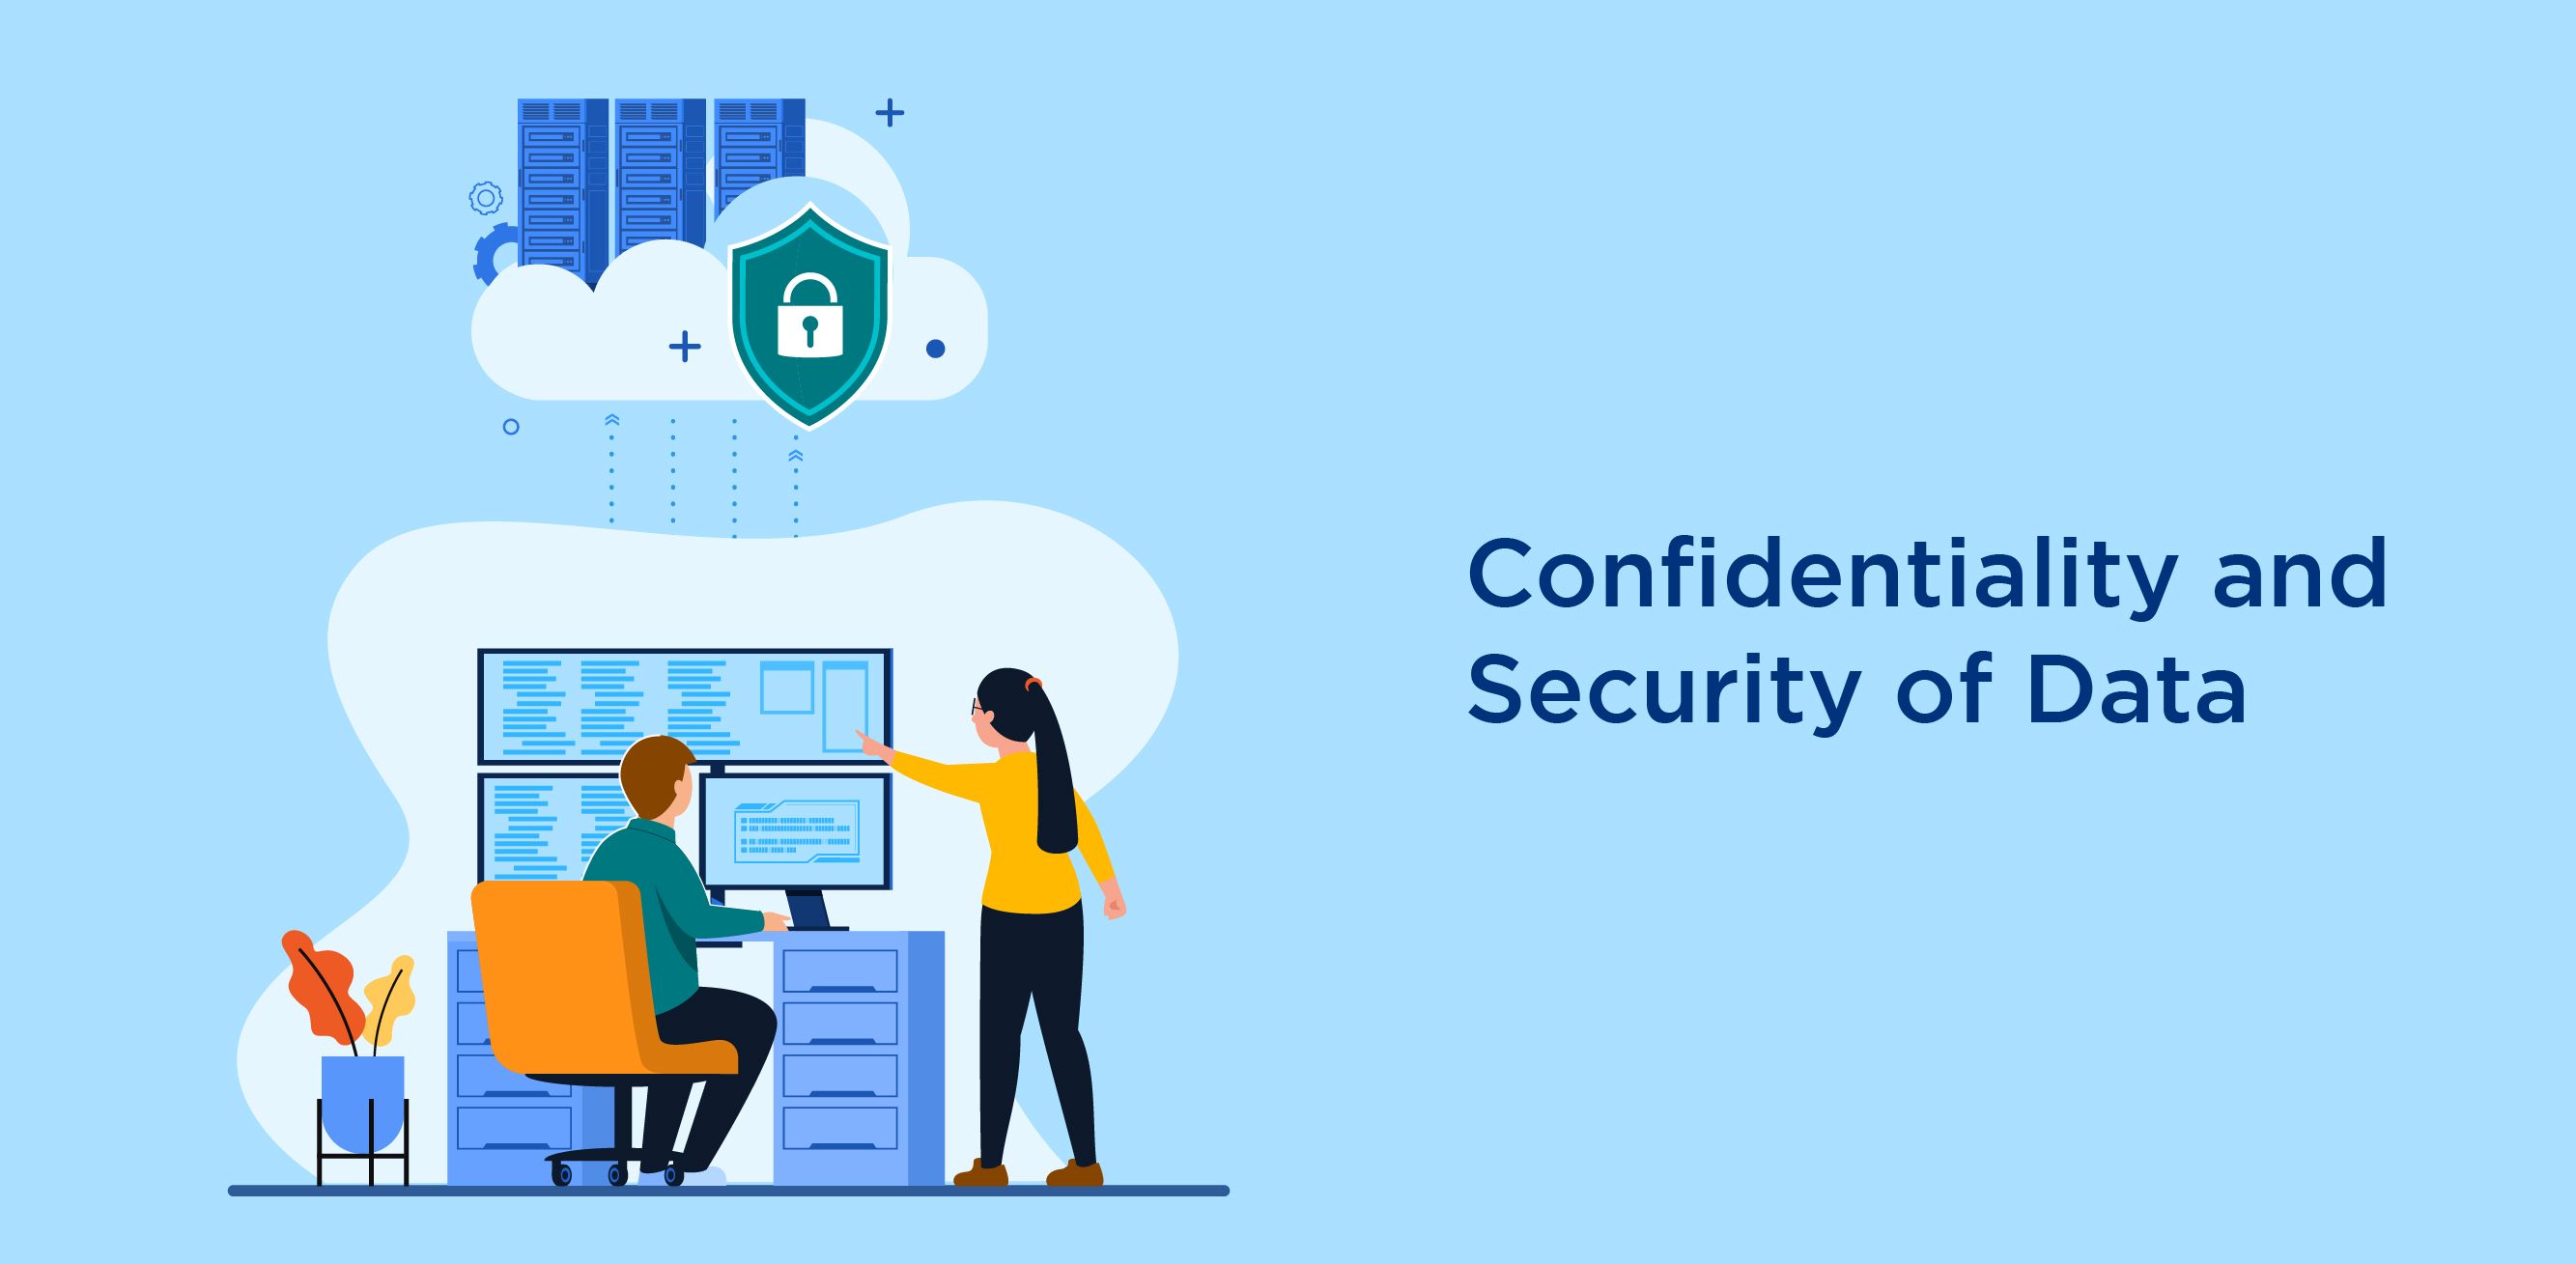 Confidentiality and Security of Data is a priority.